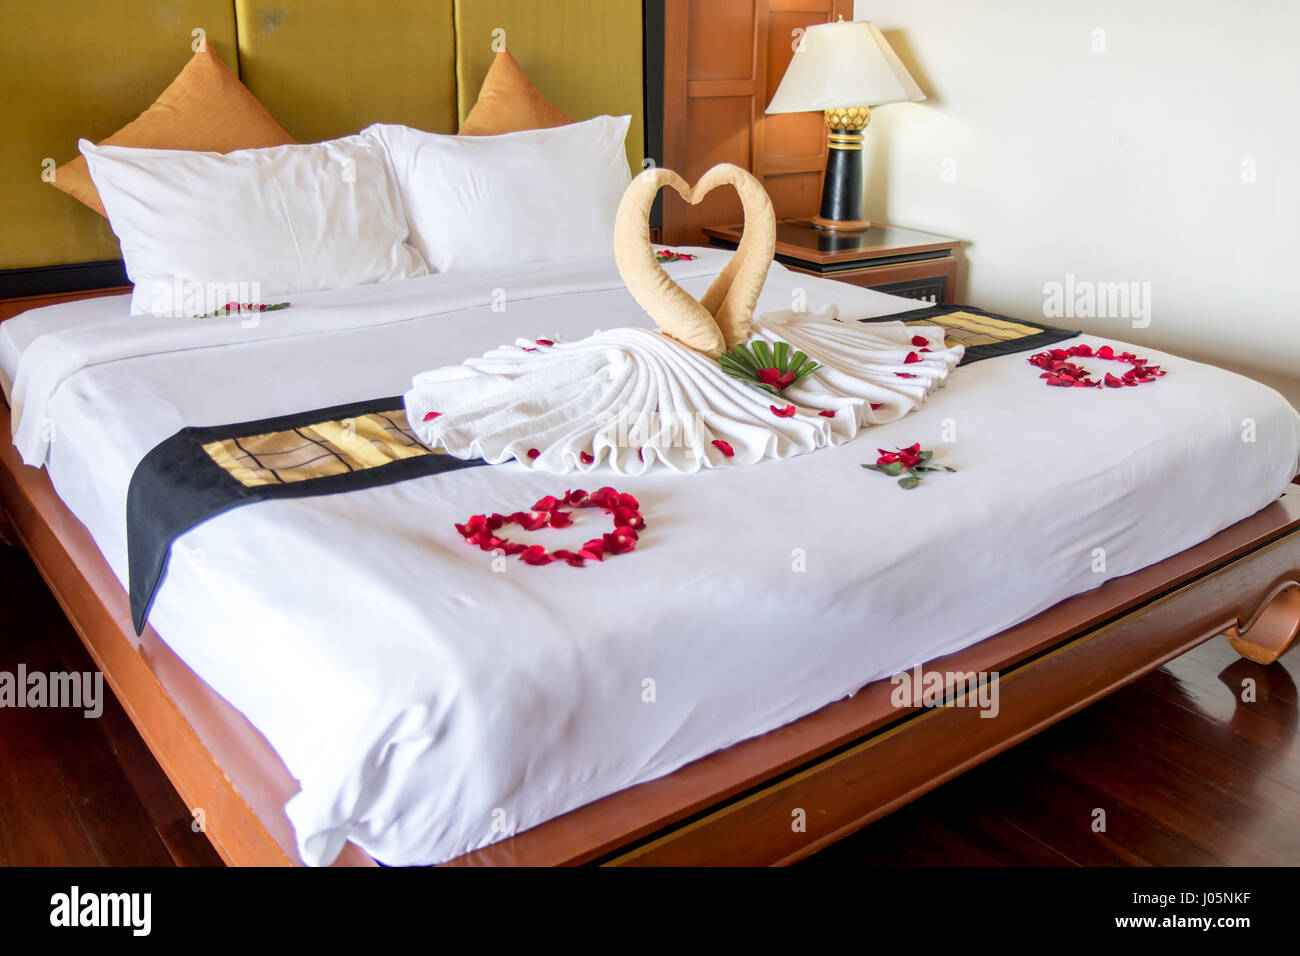 Towel as birds decoration with red rose petals on white clean bed ...